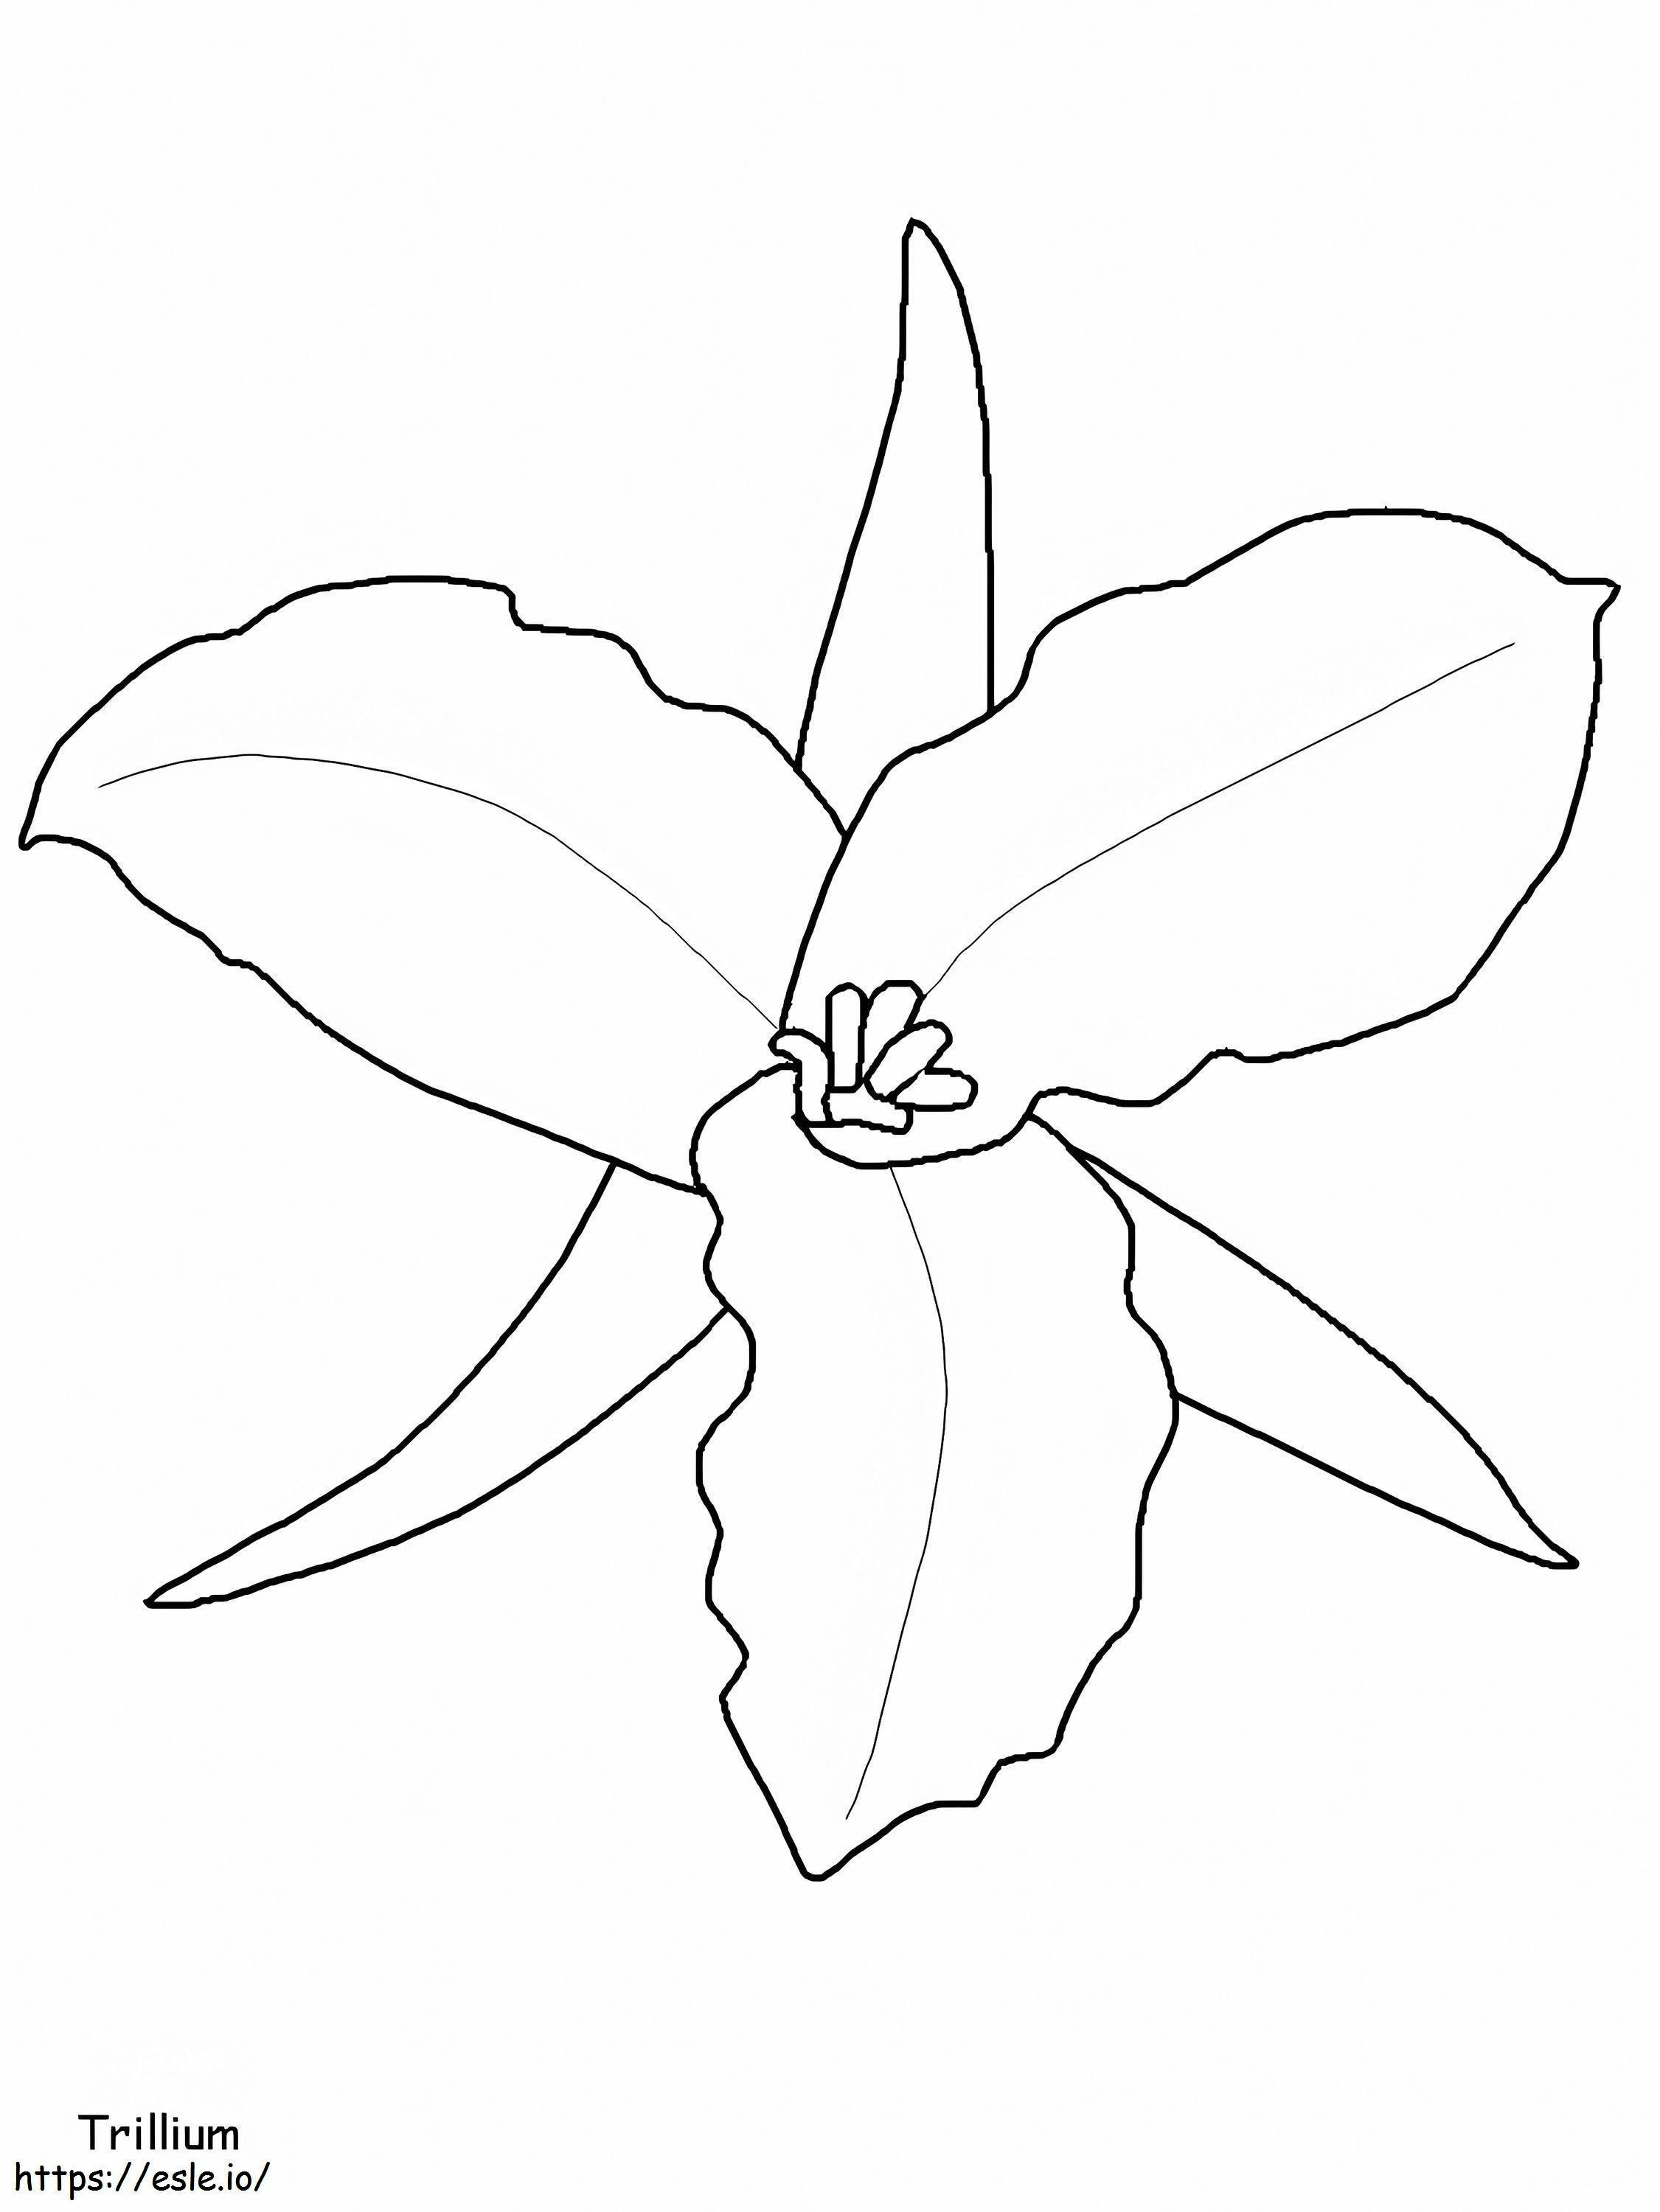 6A4 coloring page